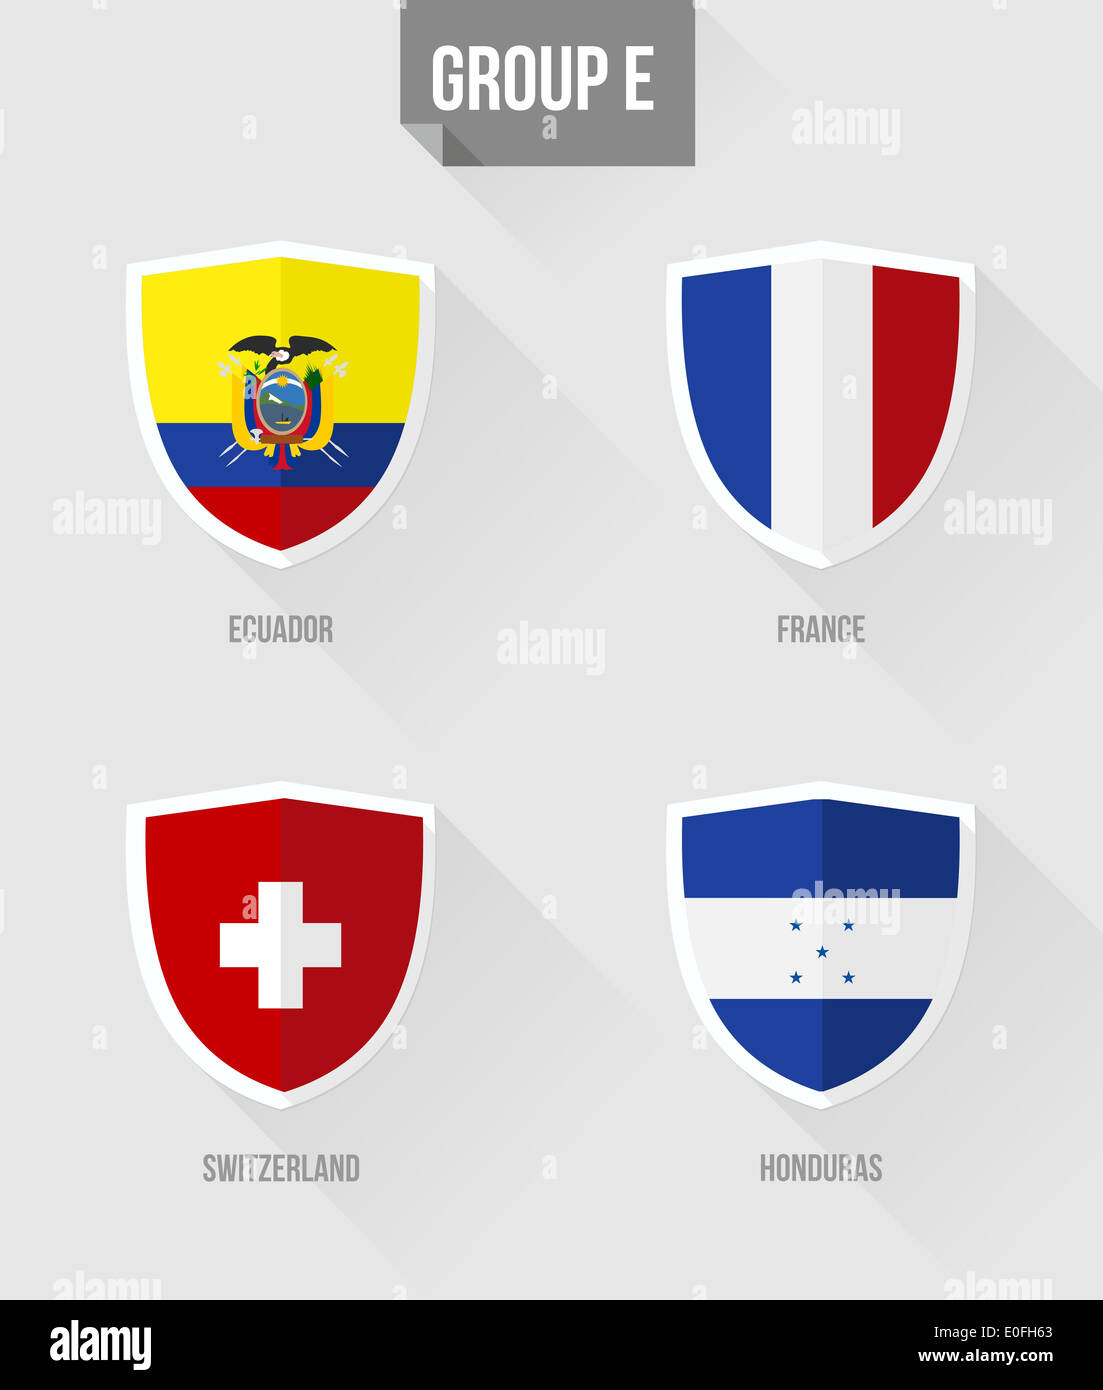 Brazil Soccer Championship 2014. Flat icons for Group E nation flags in shield sign: Ecuador, France, Switzerland, Honduras. EPS10 vector with transpa Stock Photo